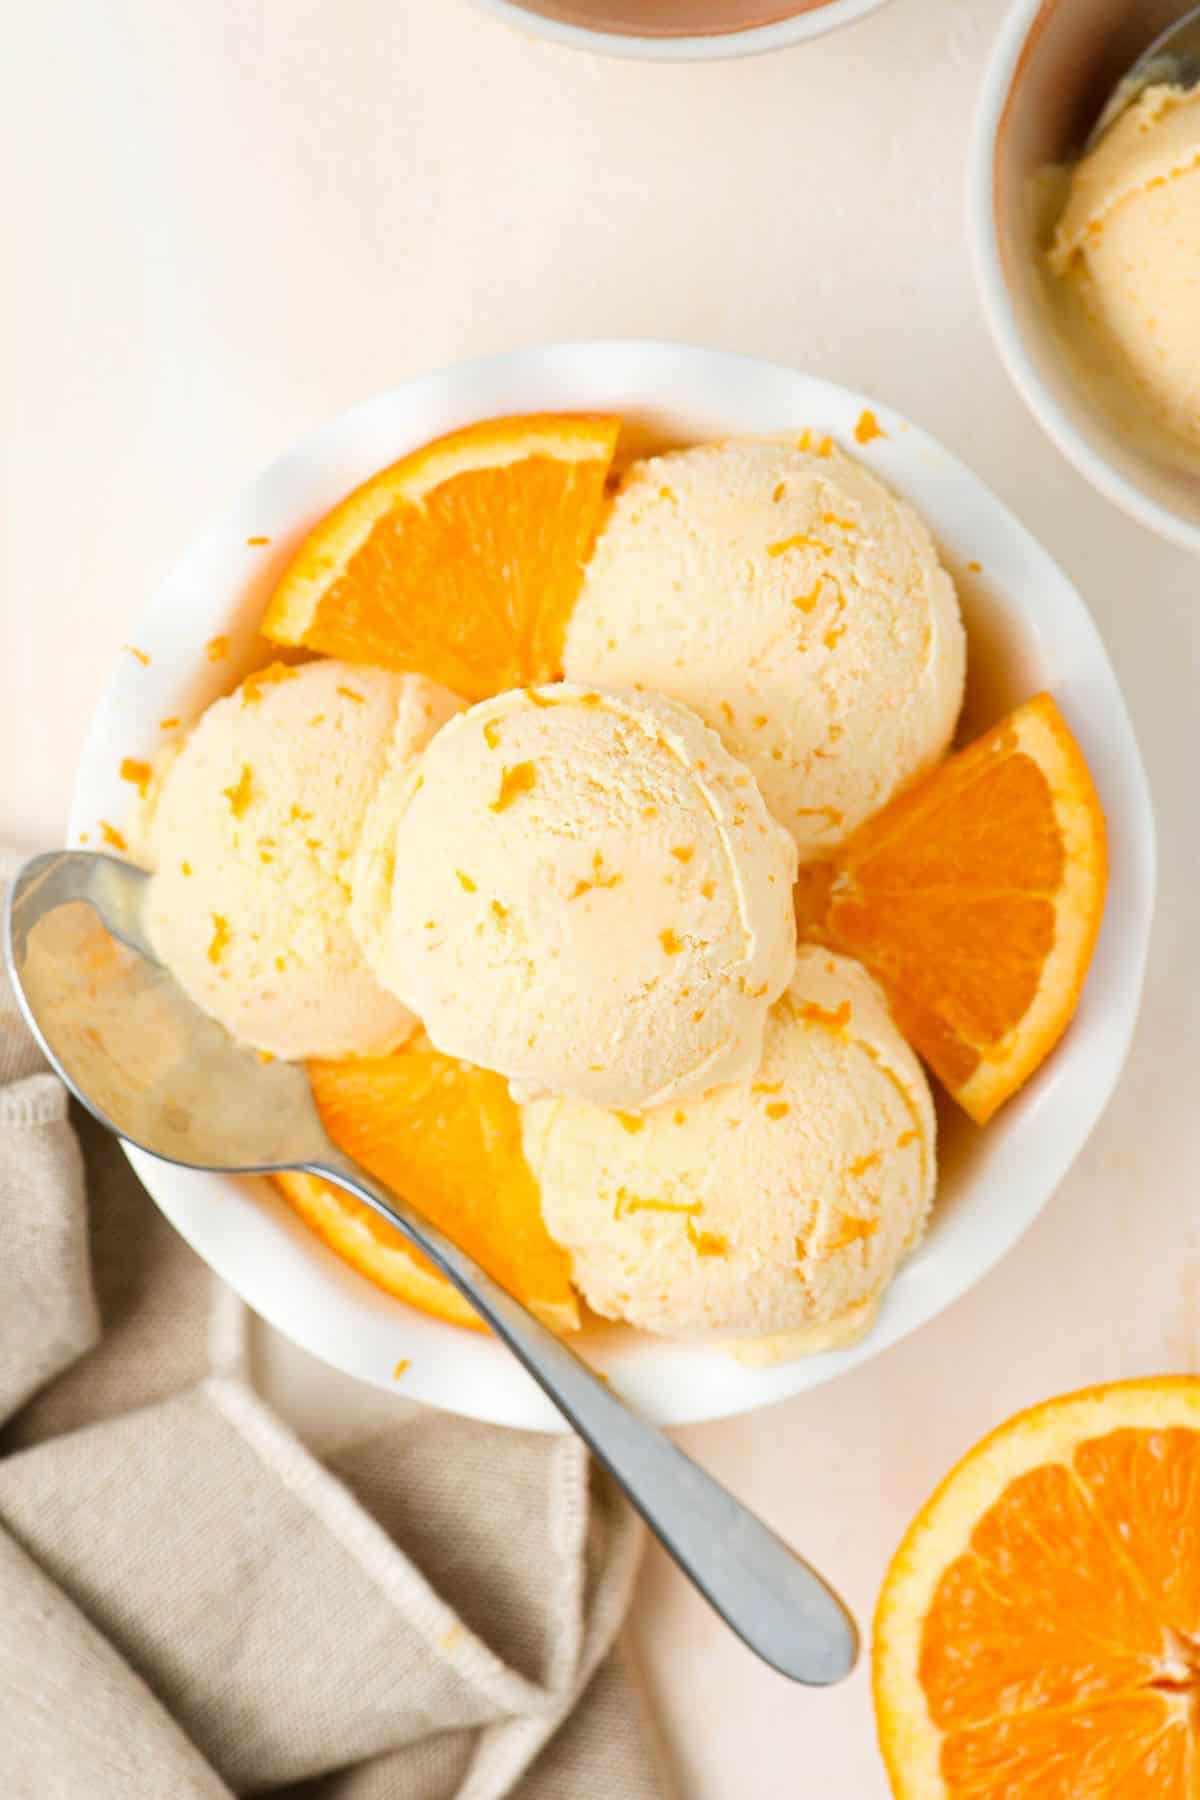 Round white bowl of ice cream with four scoops and some orange pieces, and a spoon on the edge.